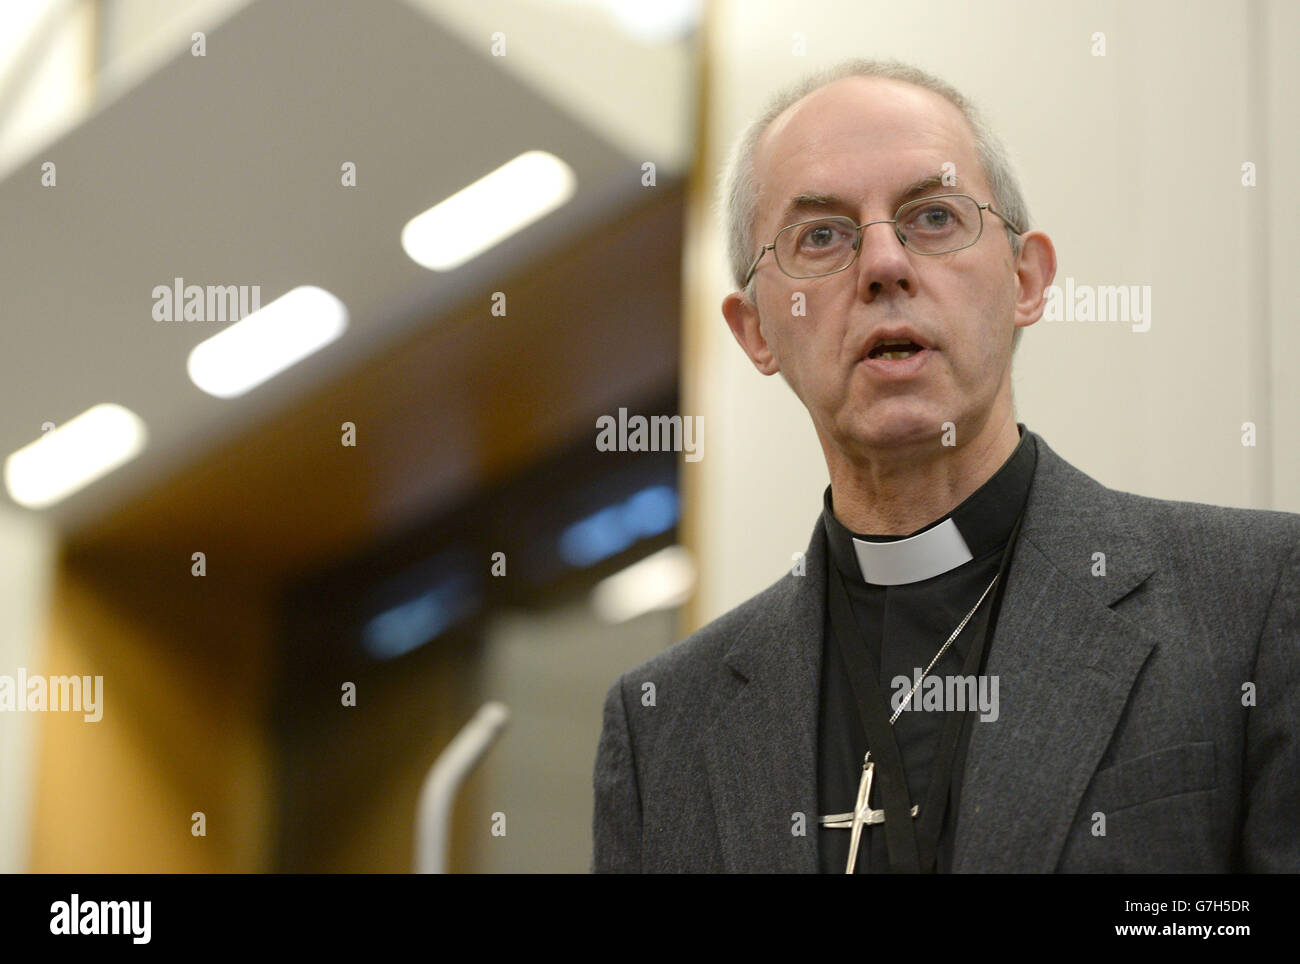 Archbishop of Canterbury, the Most Rev Justin Welby speaks at the All-Party Parliamentary Inquiry into Hunger in the UK in the House of Commons, London which launches a blueprint to eliminate hunger in Britain by 2020. Stock Photo